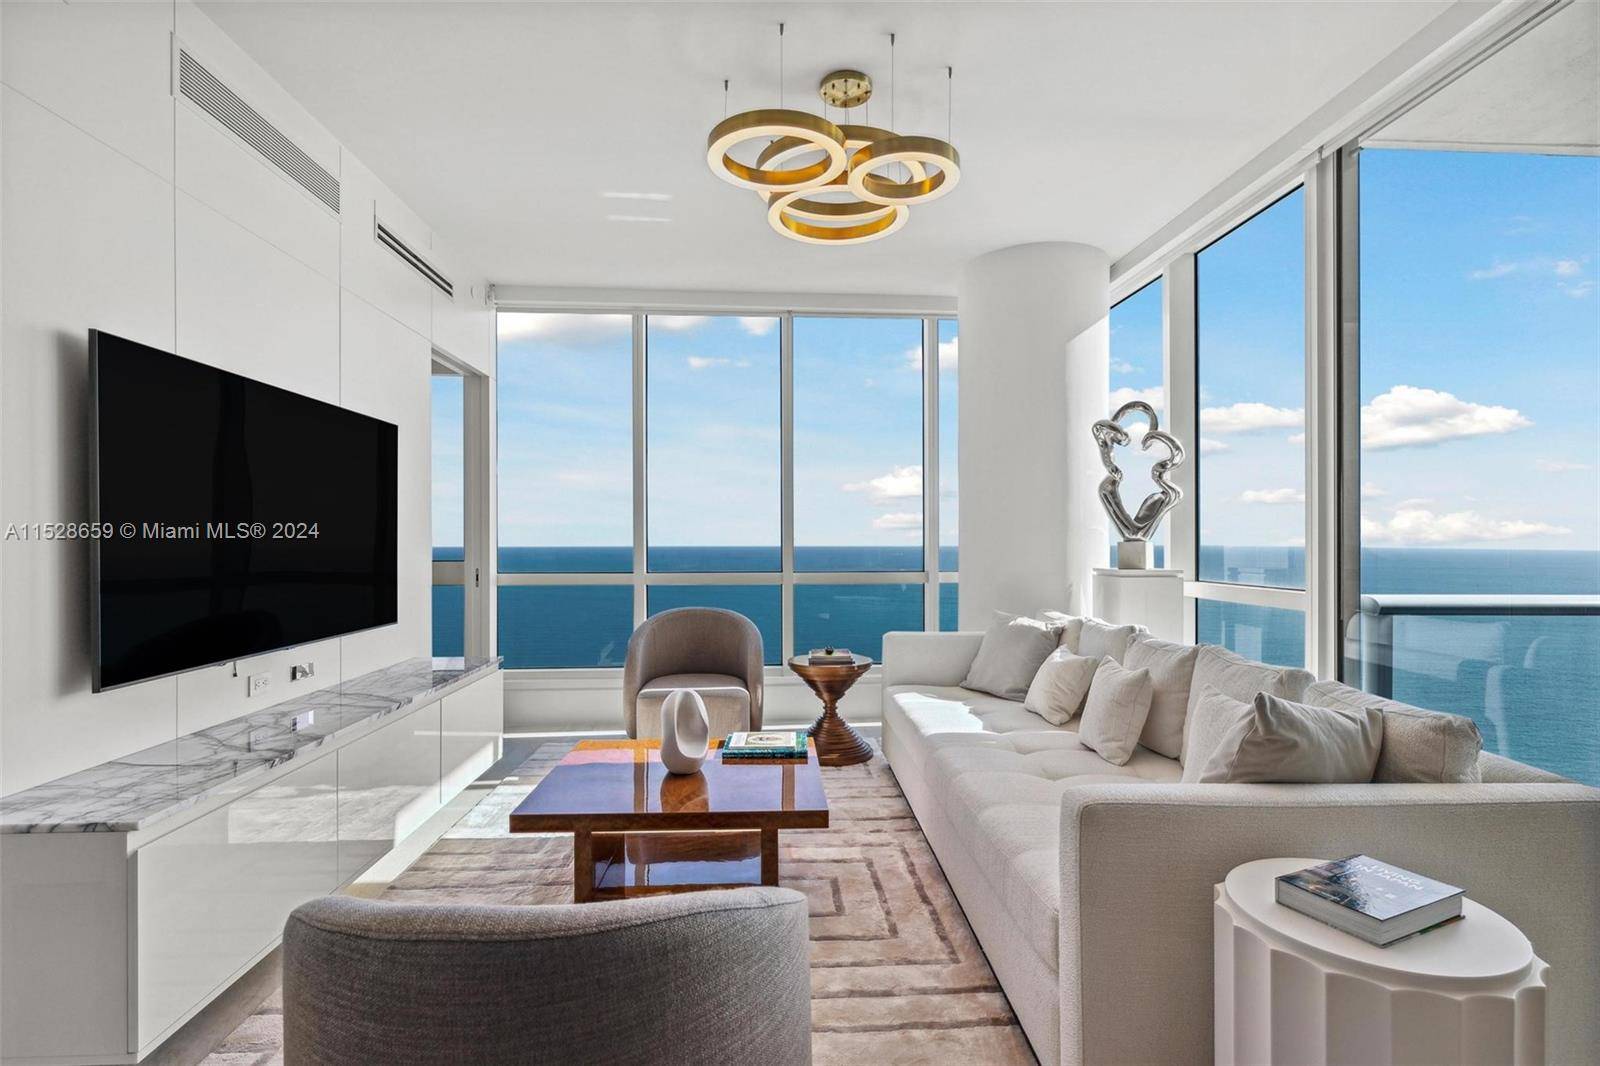 Welcome to the chic lower PH 3905 at Continuum South with unobstructed views of the Atlantic Ocean and the entire Miami Beach coastline.